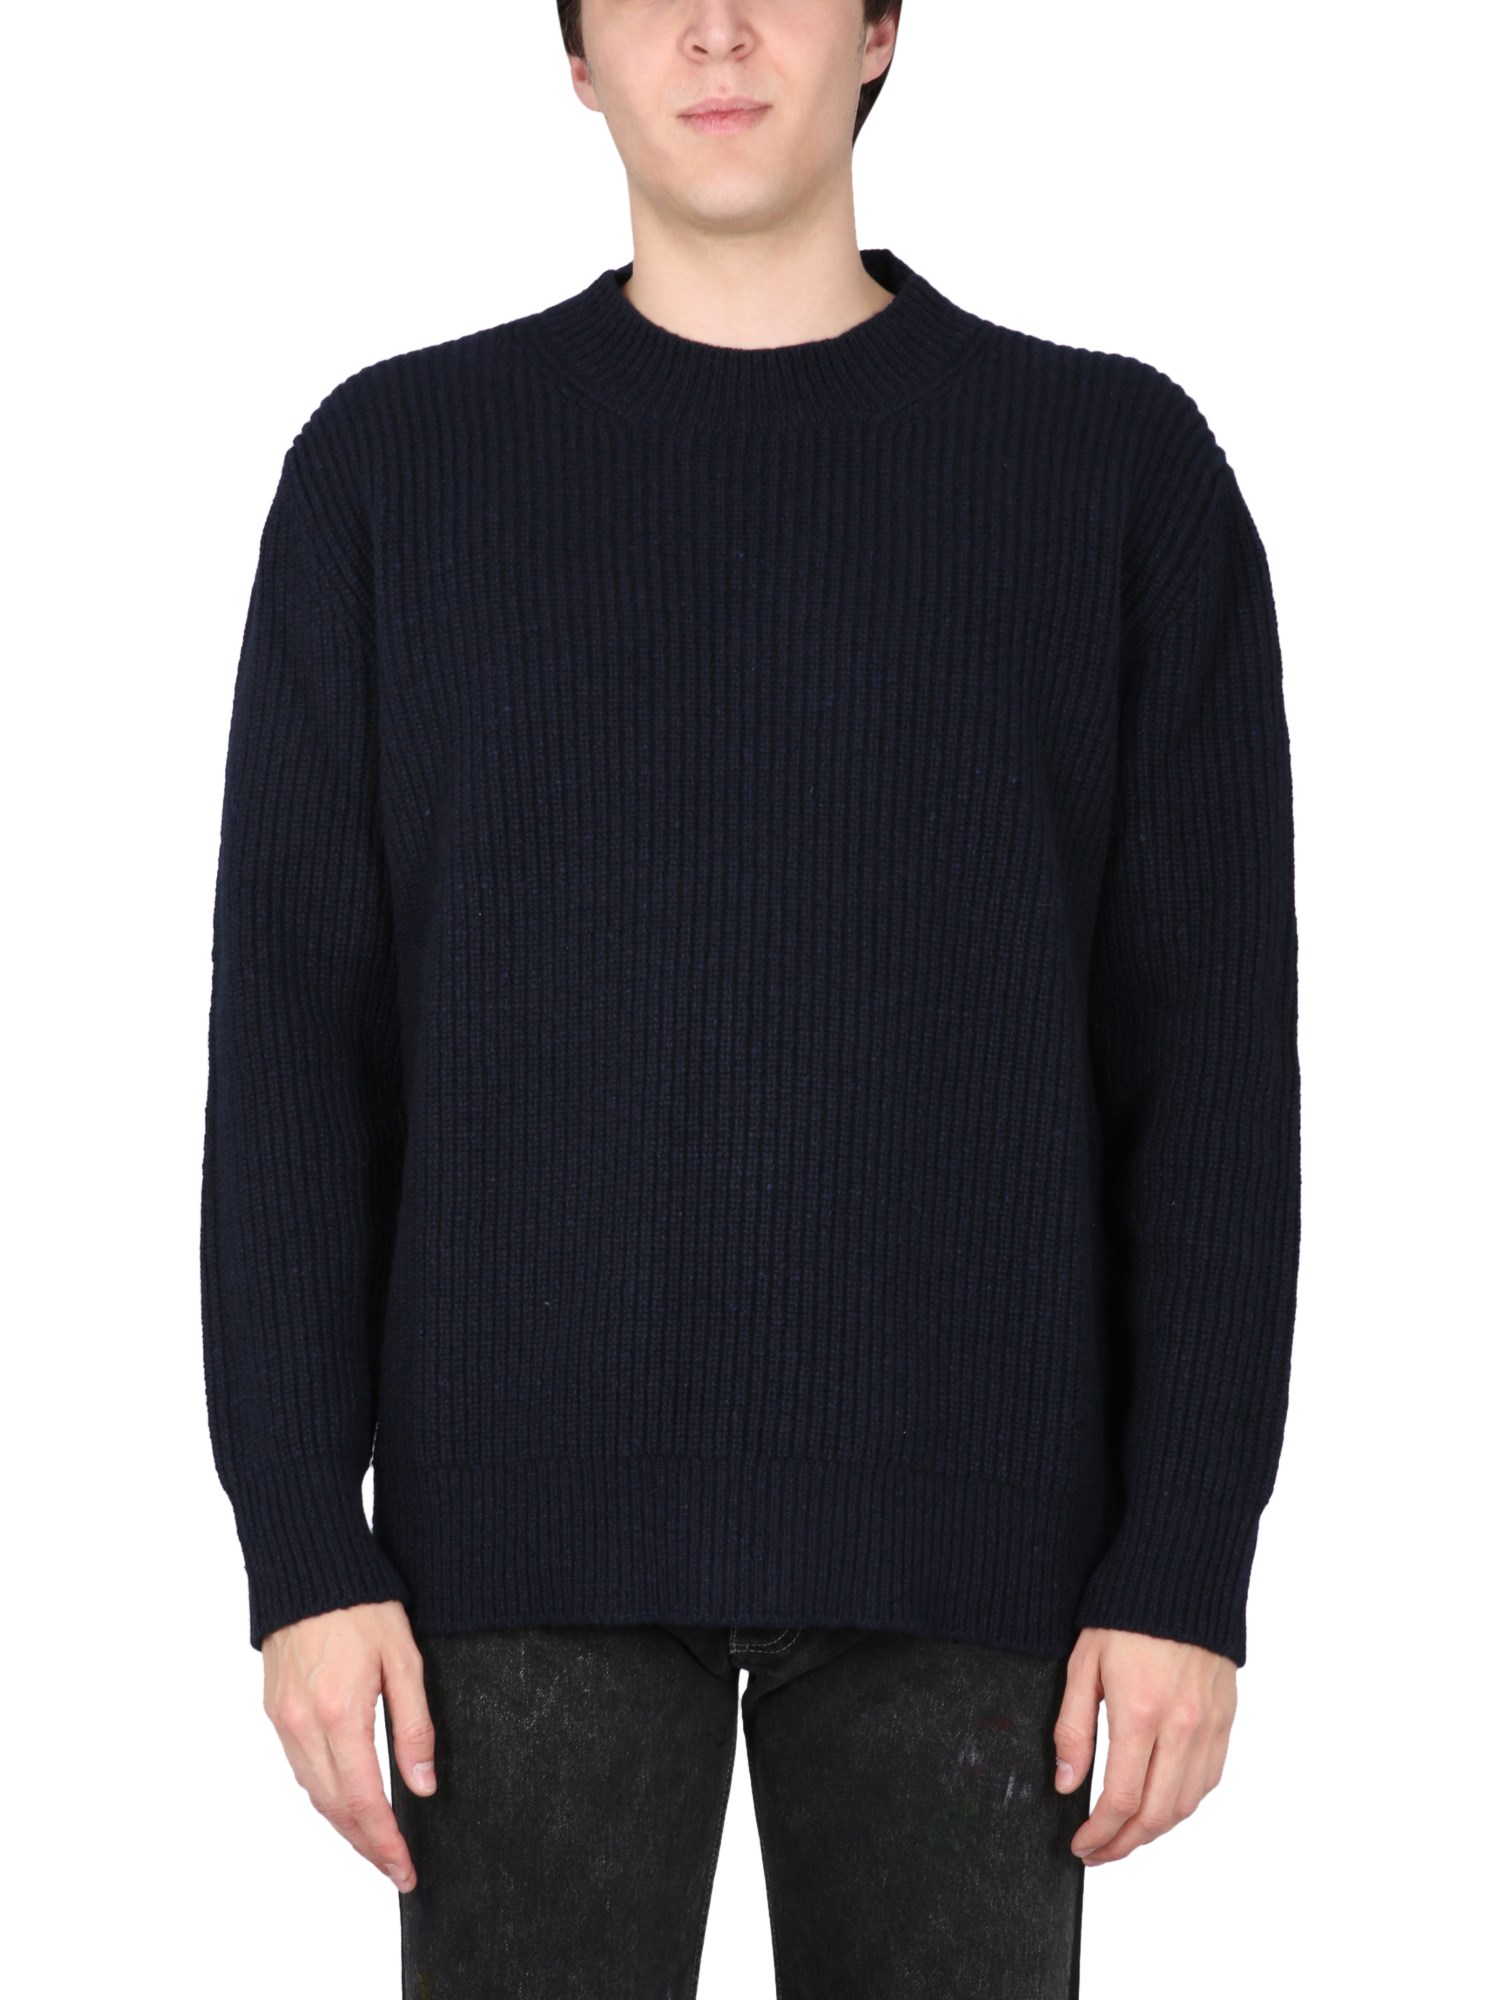 maison margiela donegal knit pullover